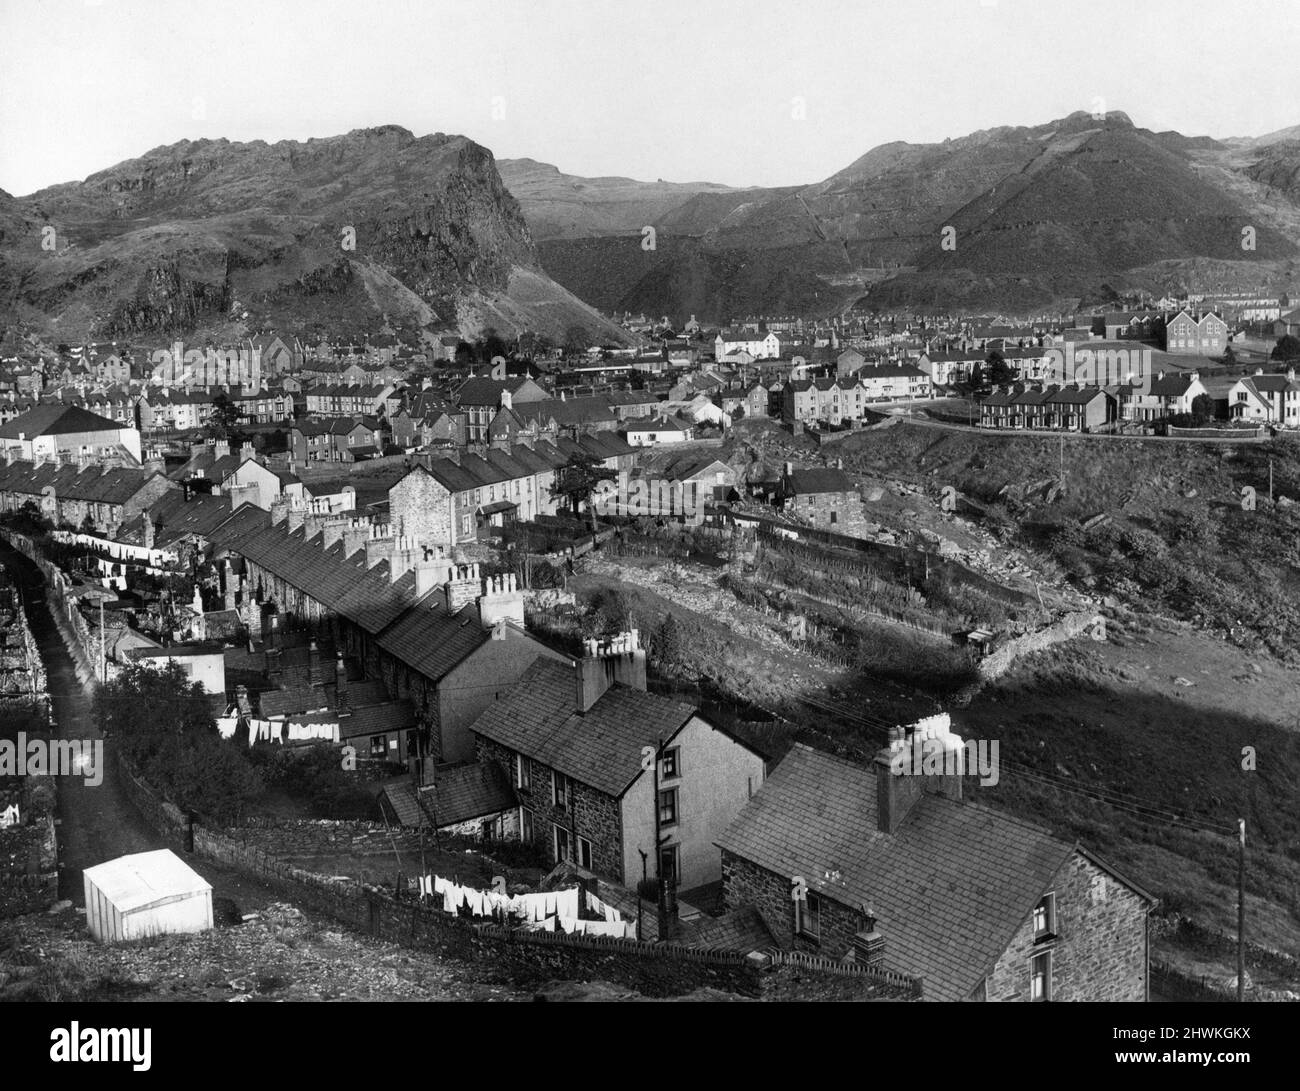 Blaenau Ffestiniog is a historic mining town in the historic county of Merionethshire, Wales, 8th March 1972. Our Picture Shows ... the quarries dominating the township of Blaenau Ffestiniog in the late afternoon sunshine. Stock Photo